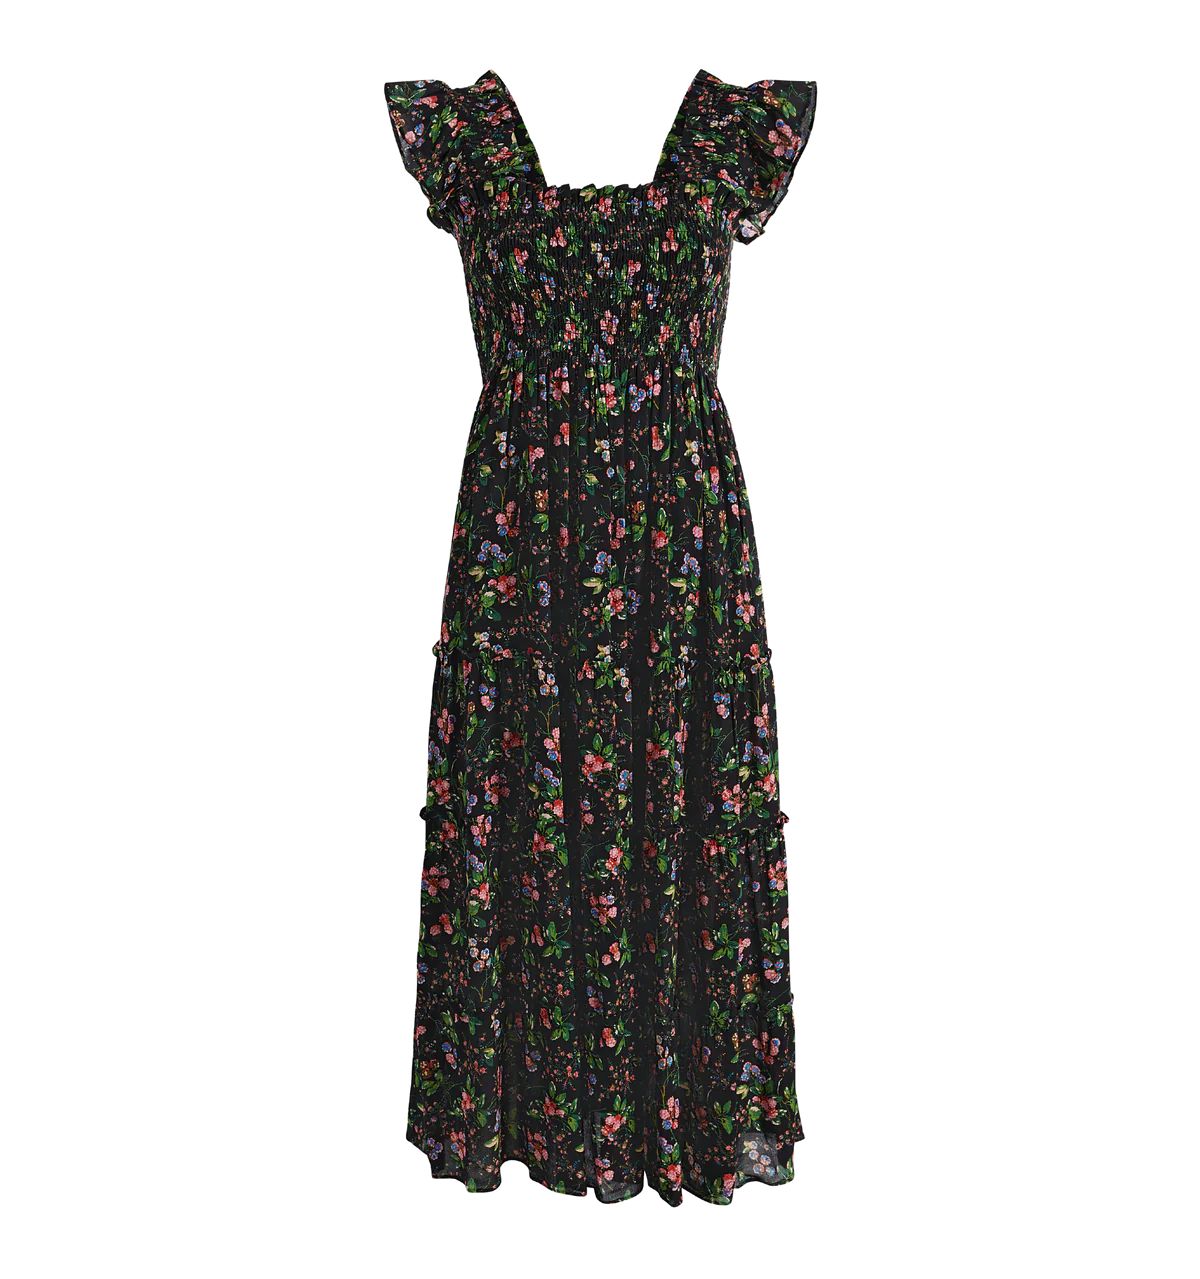 The Ellie Nap Dress in Multi Berry Crinkle Chiffon | Over The Moon